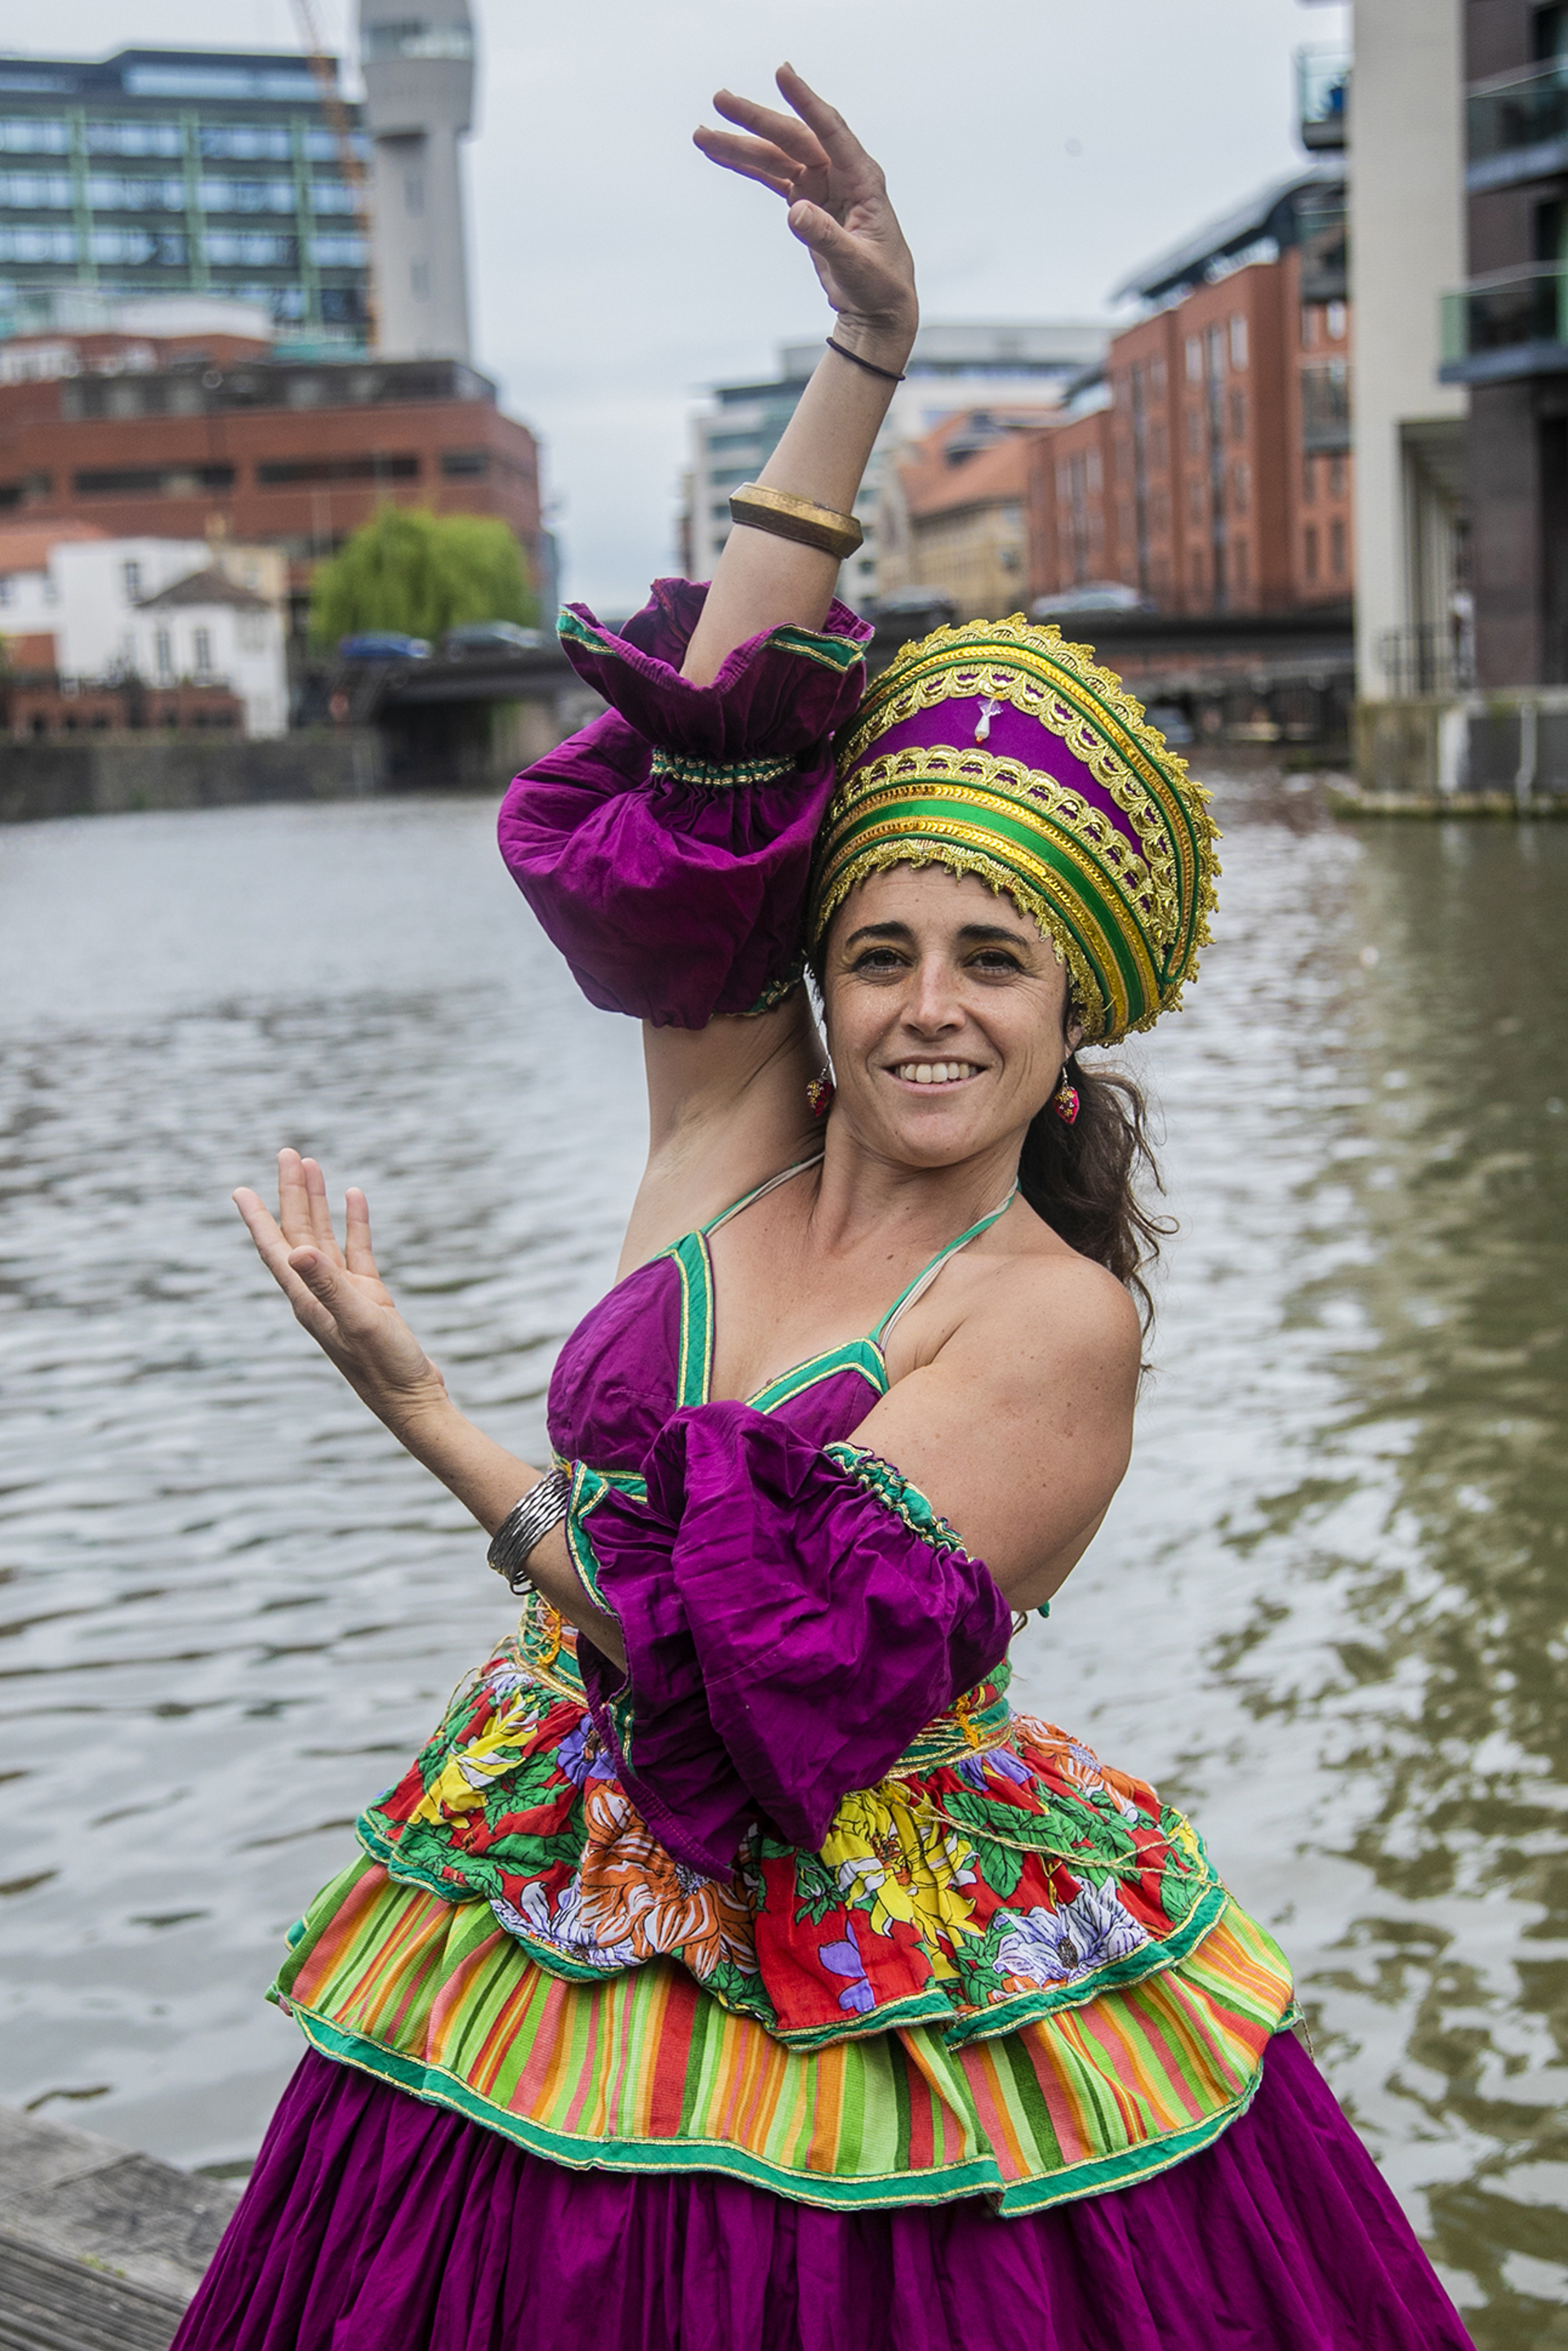 Brazialian female dancer brown hair wearing traditional purple and and gold dress with large golden headpiece holding arm above her head and one framing the face. In front of river and urban Bristol buildings.